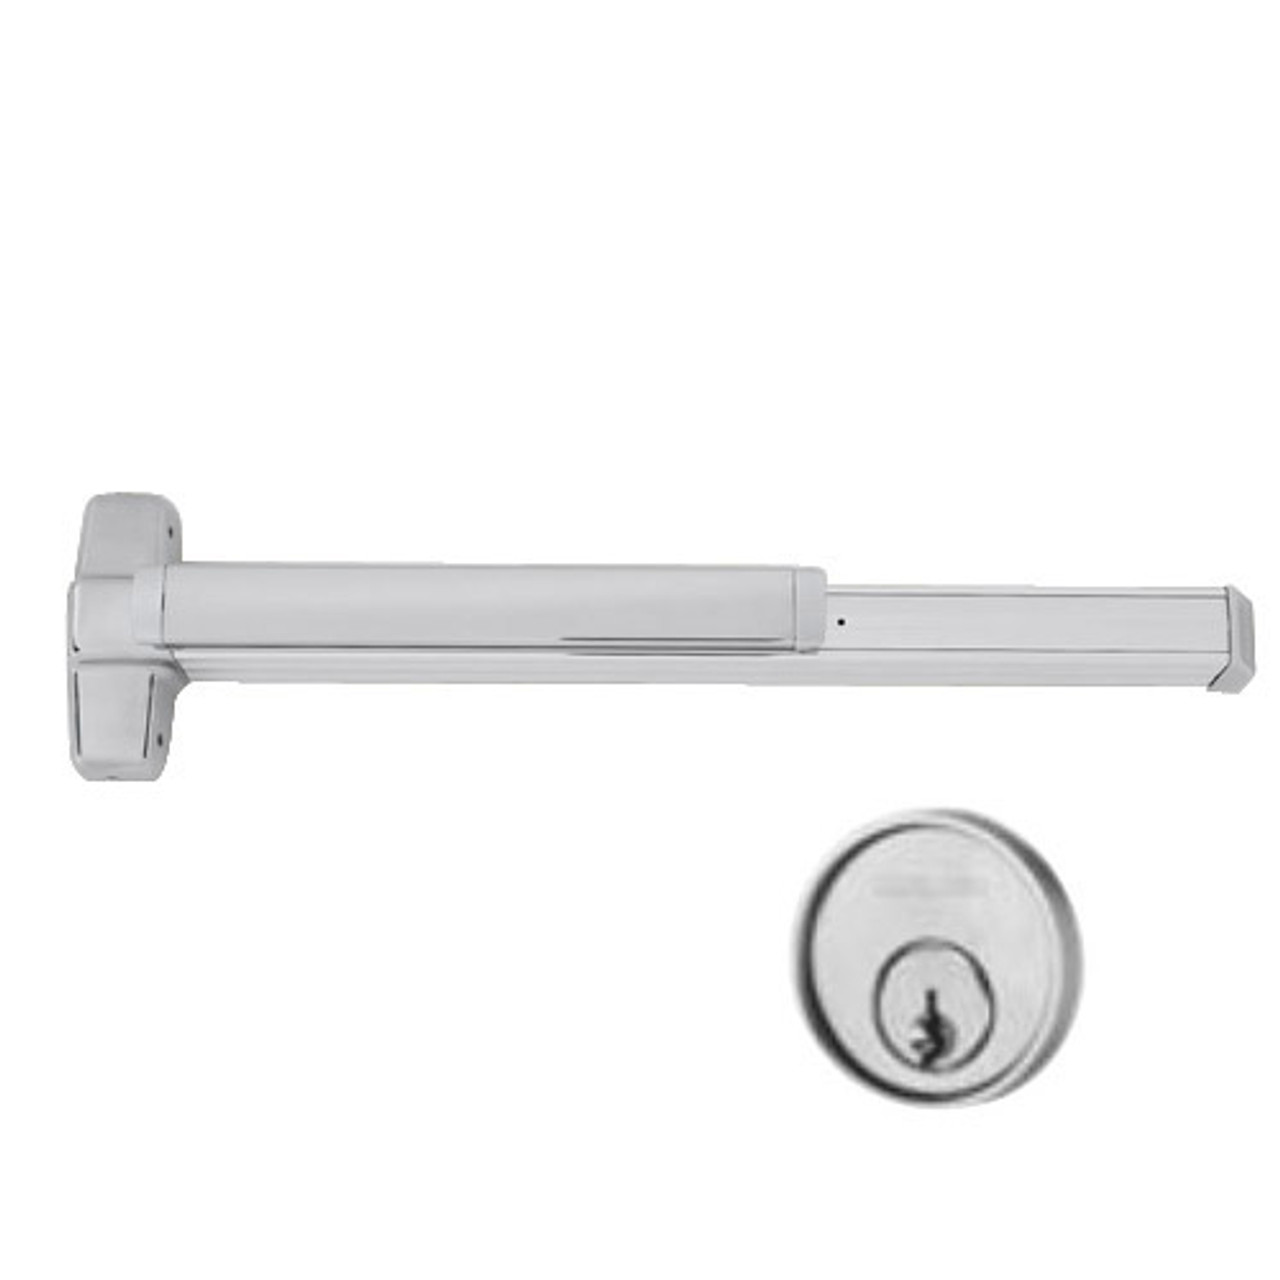 EL9847WDC-NL-OP-US32D-4 Von Duprin Exit Device with Electric Latch Retraction in Satin Stainless